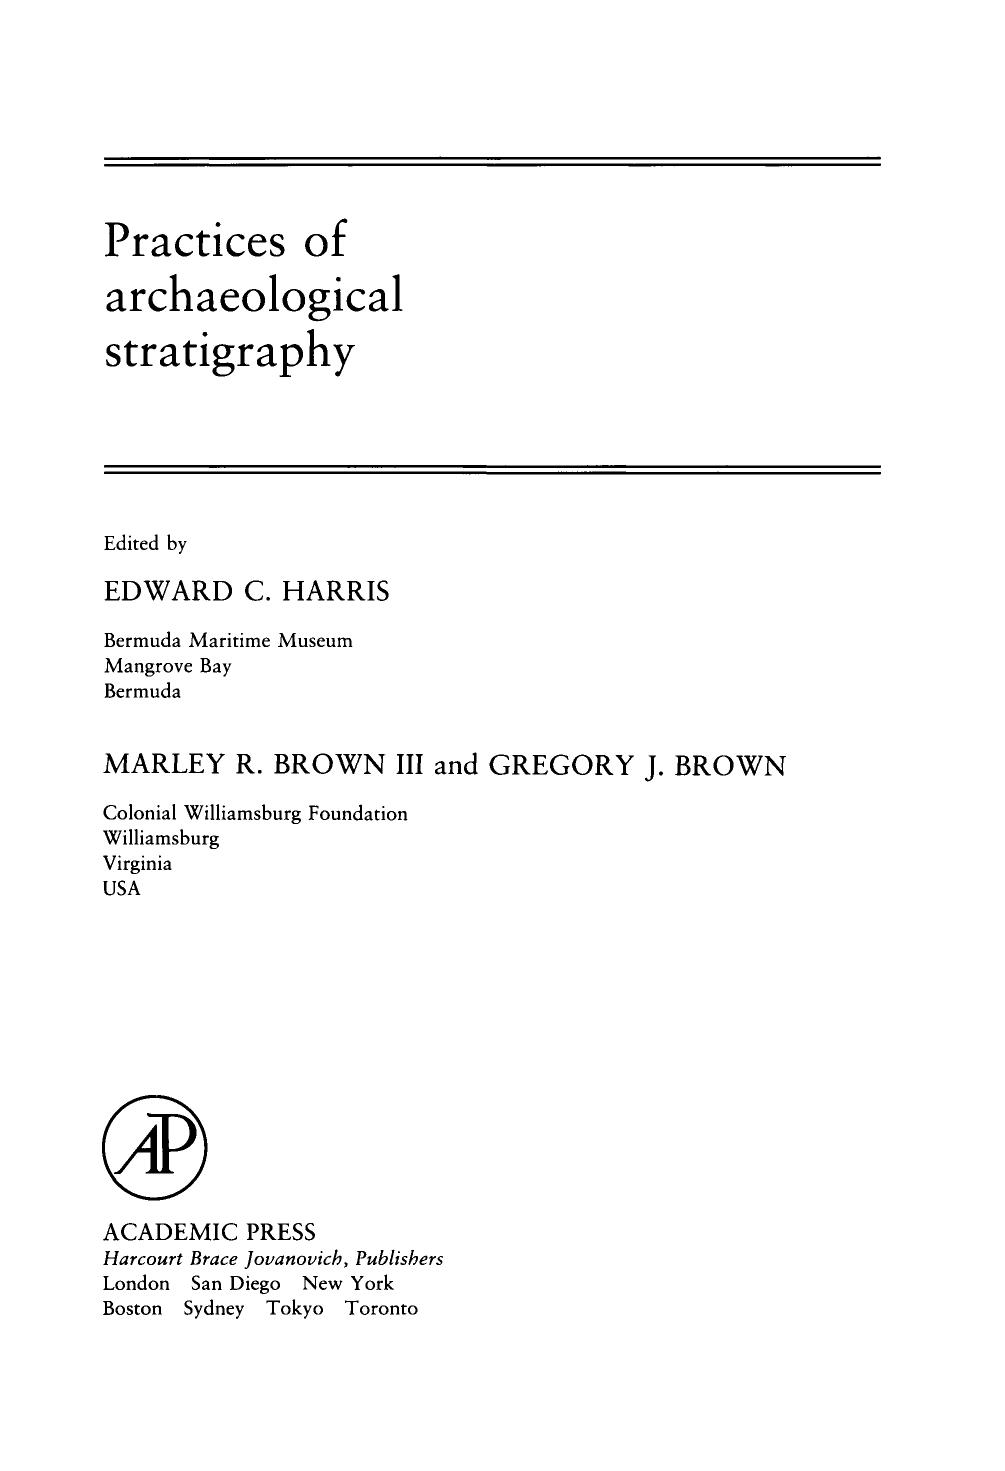 Practices in Archaeological Stratigraphy1993)